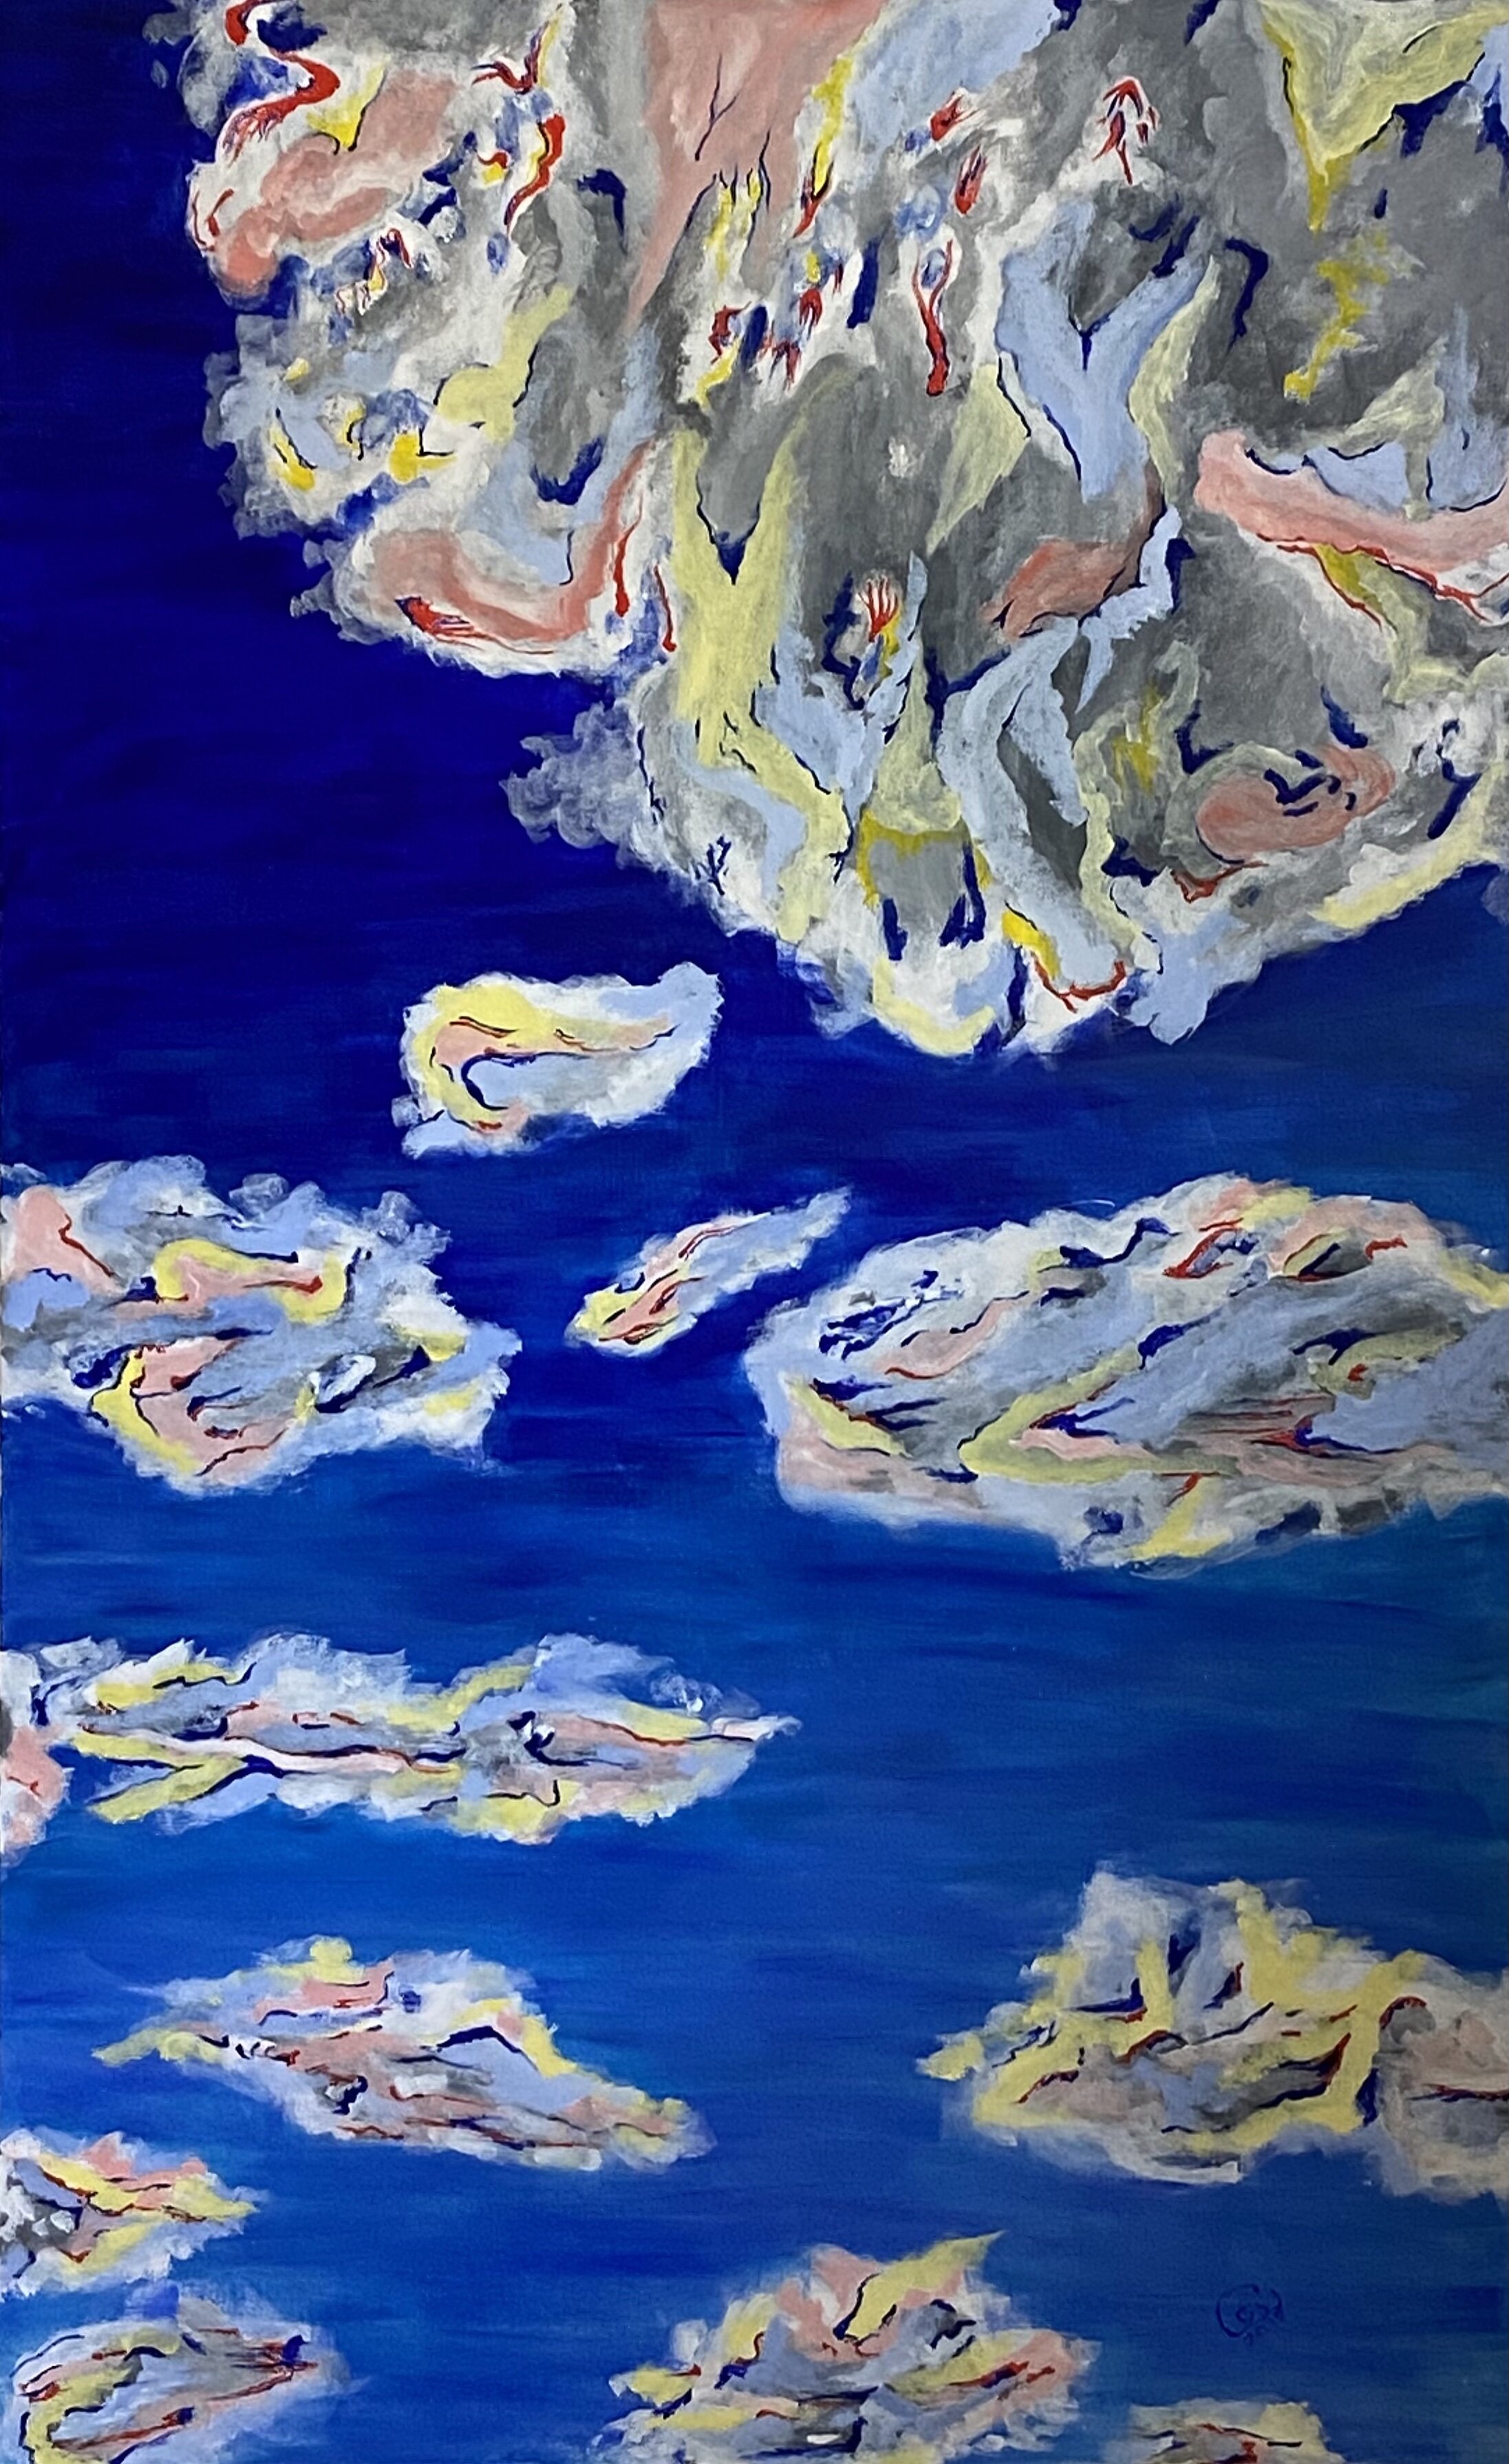 In the Clouds-30x48 Inch-Acrylic-$1000.jpg